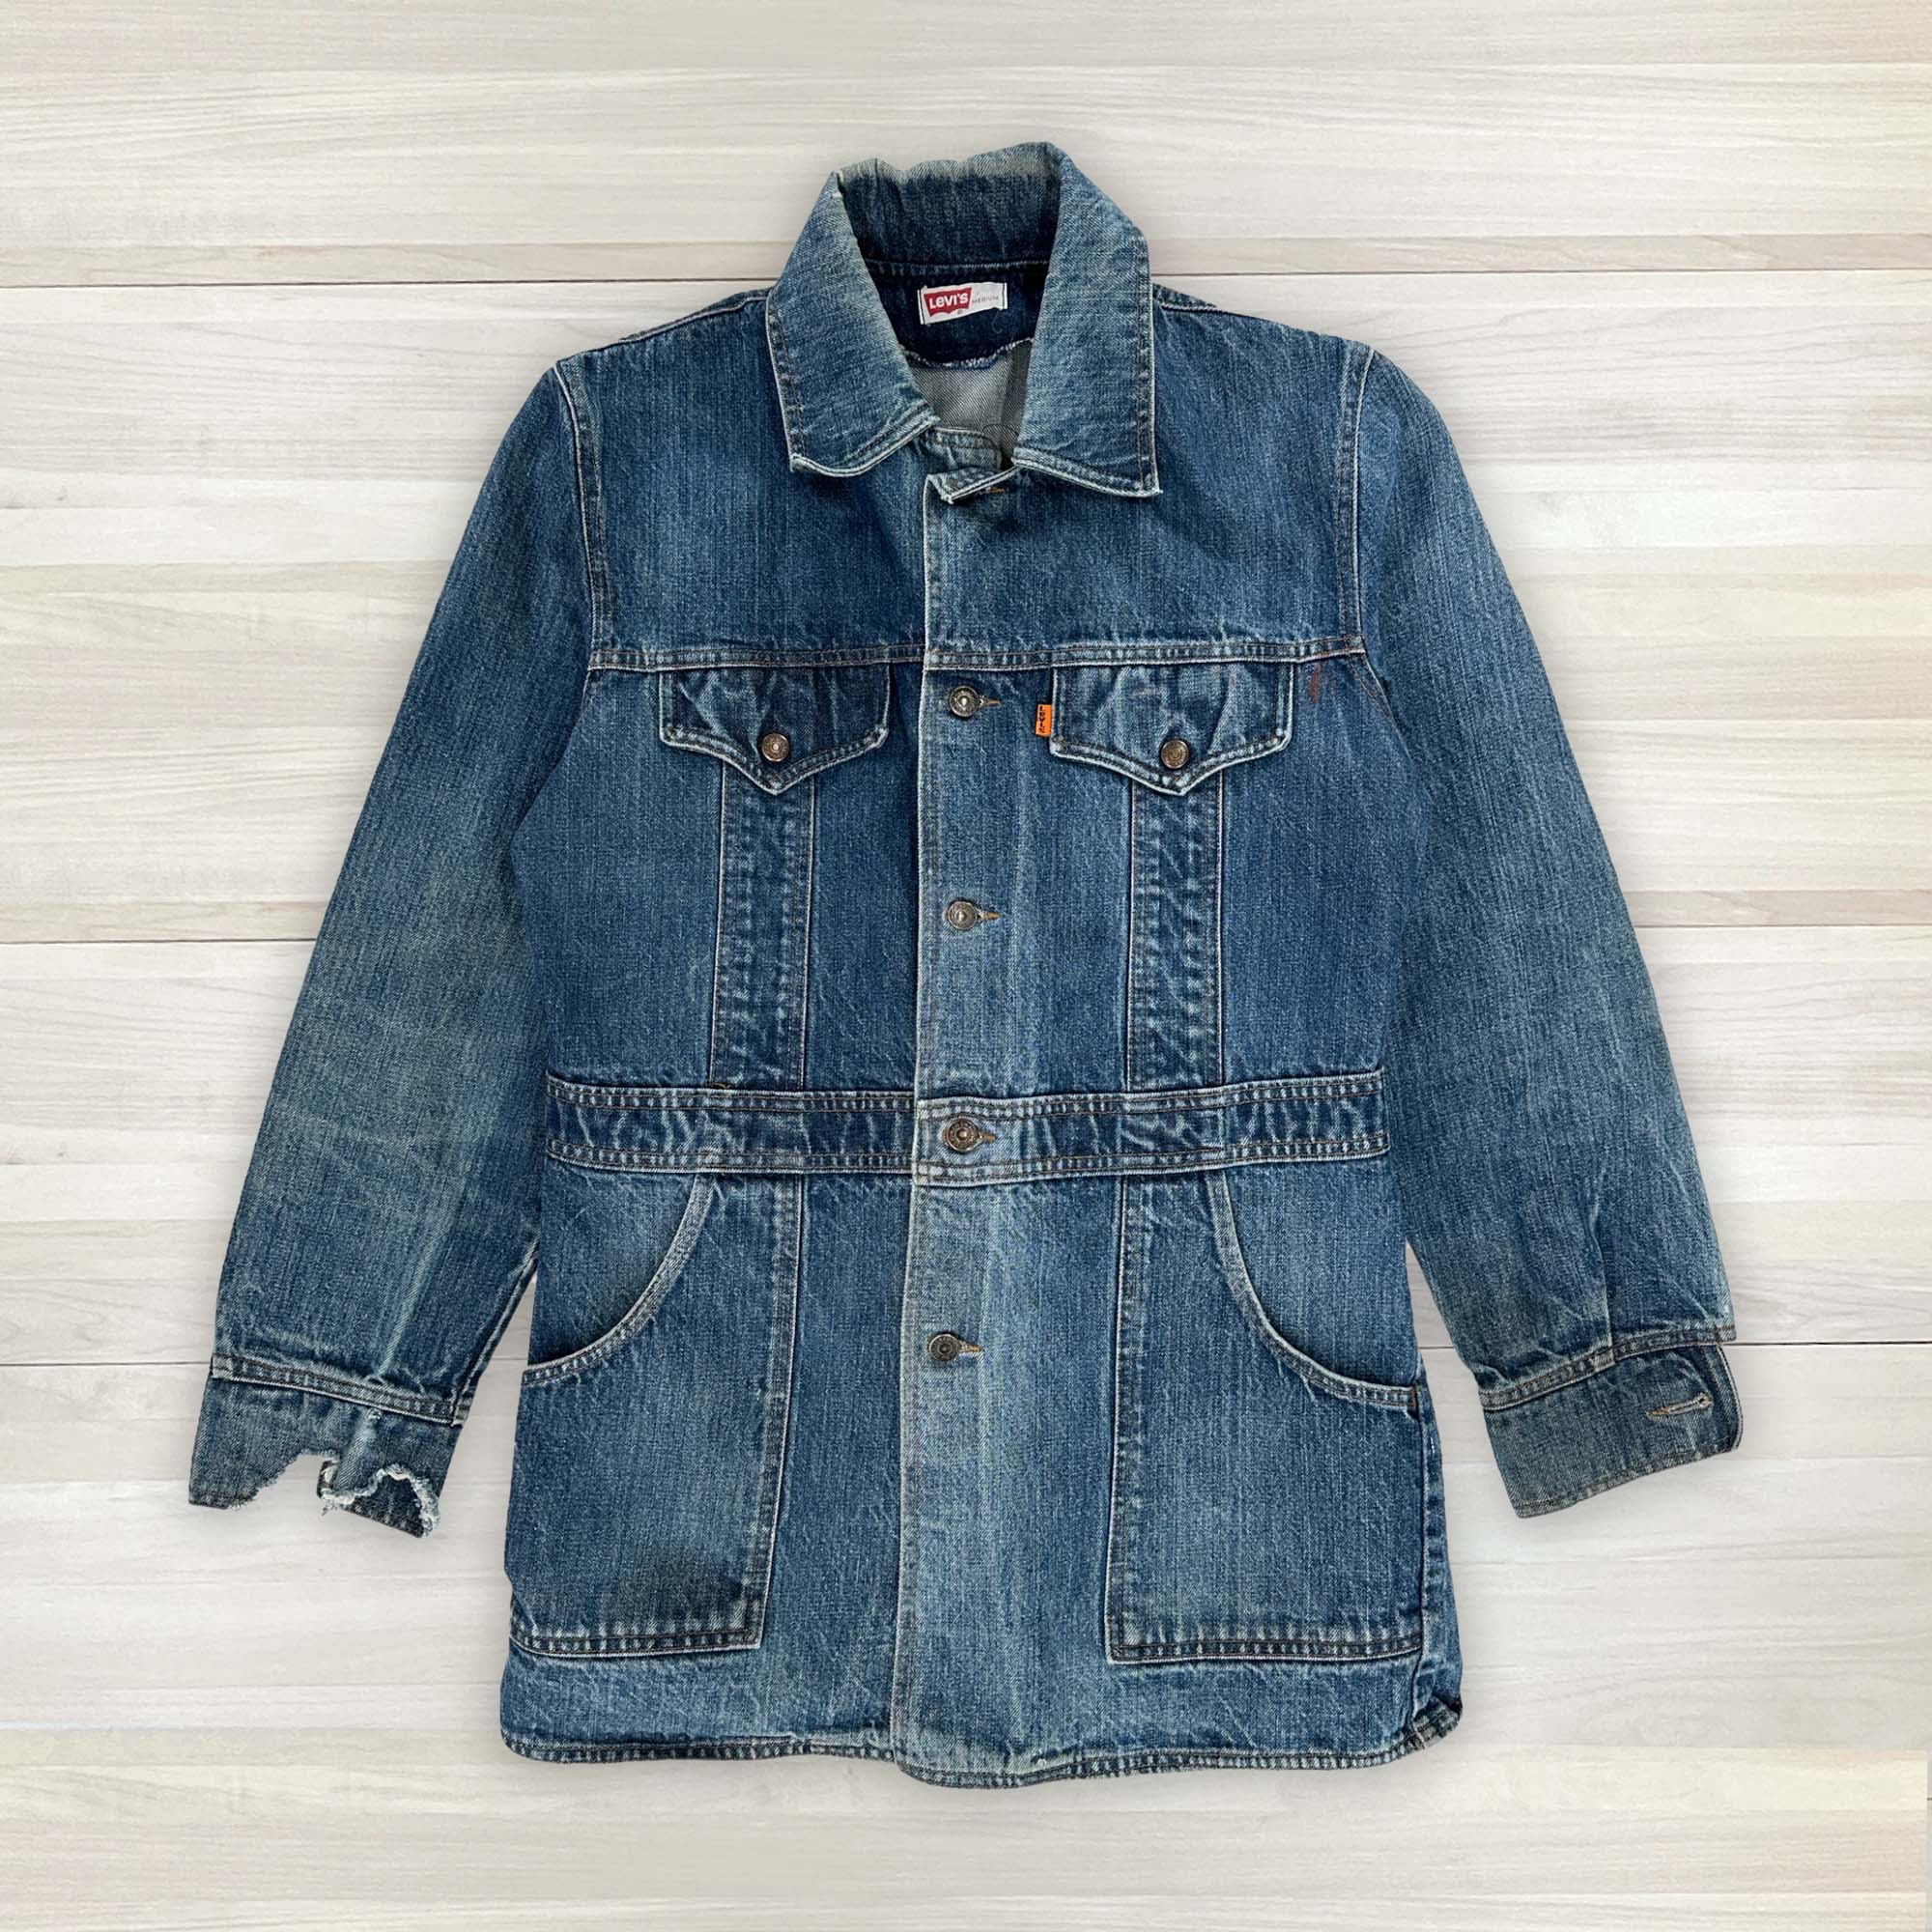 Vintage collection: featured image: Levi's jacket